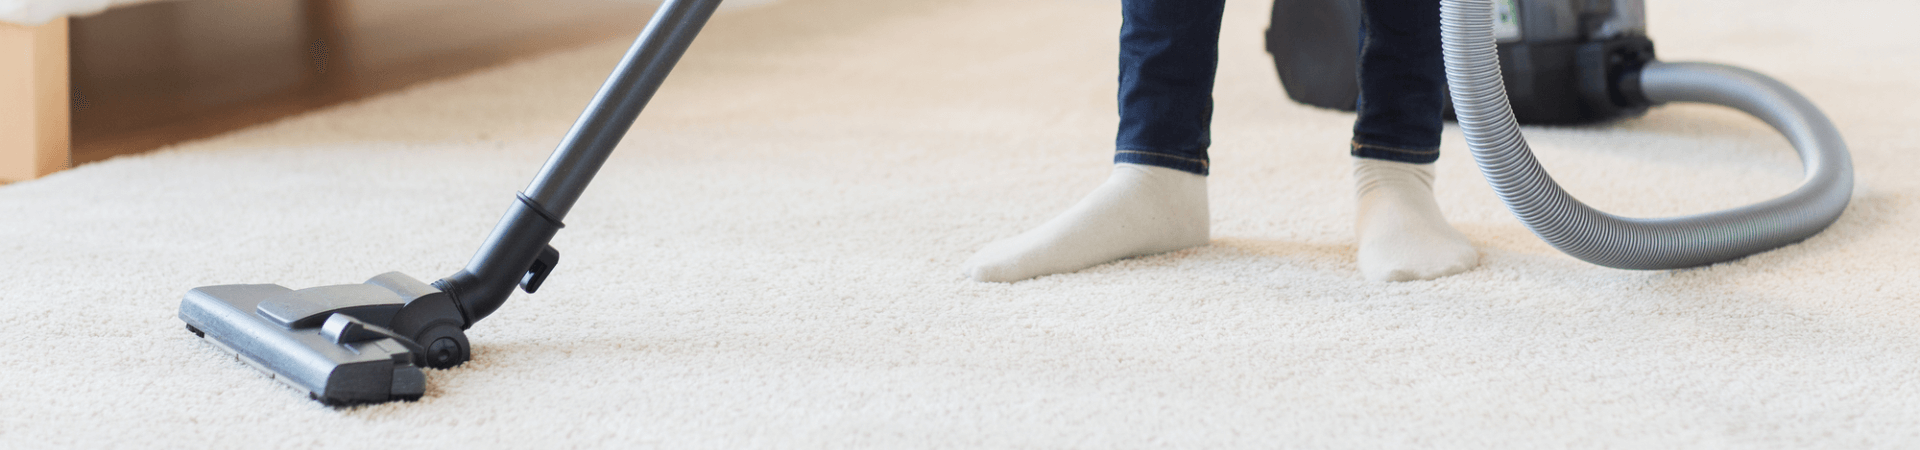 The Home Maker's Guide to Proper Vacuuming